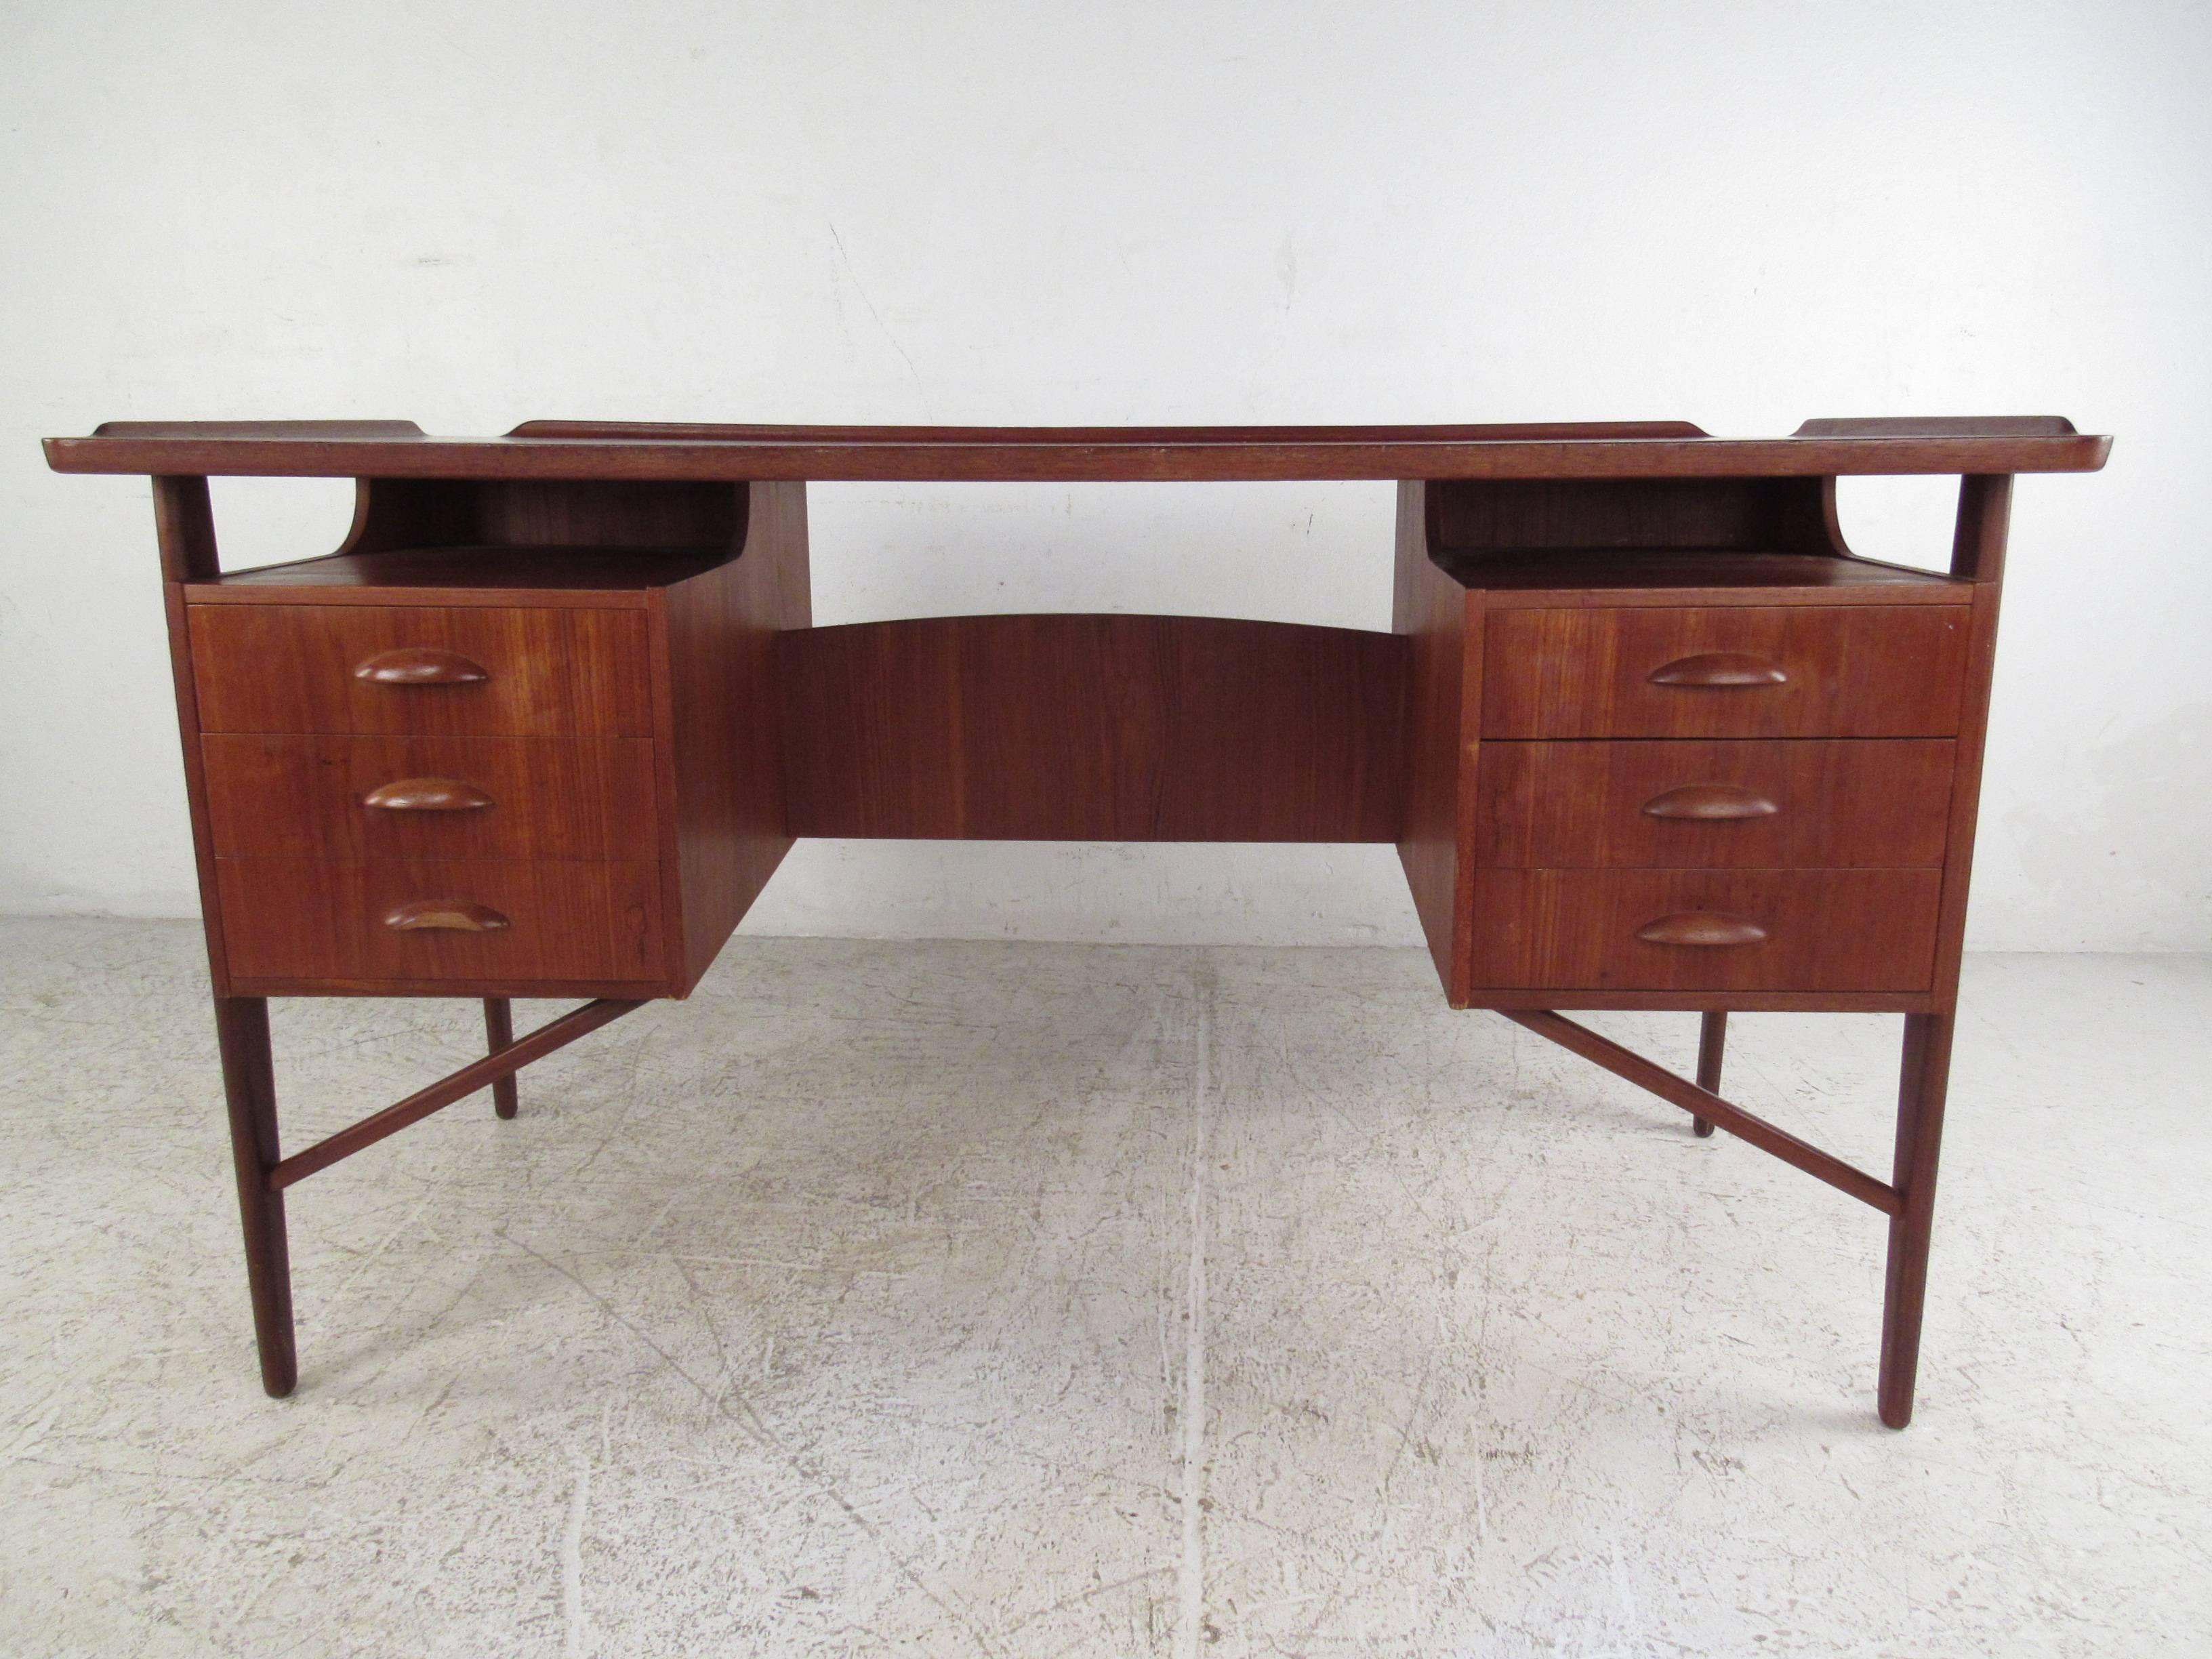 This double-sided teak desk features wonderful Mid-Century design, with raised edges, curved handles, and drop front cabinet storage on the rear side. Mirrored bar, and display shelf round out the vintage charm of the desk, making it a stylish